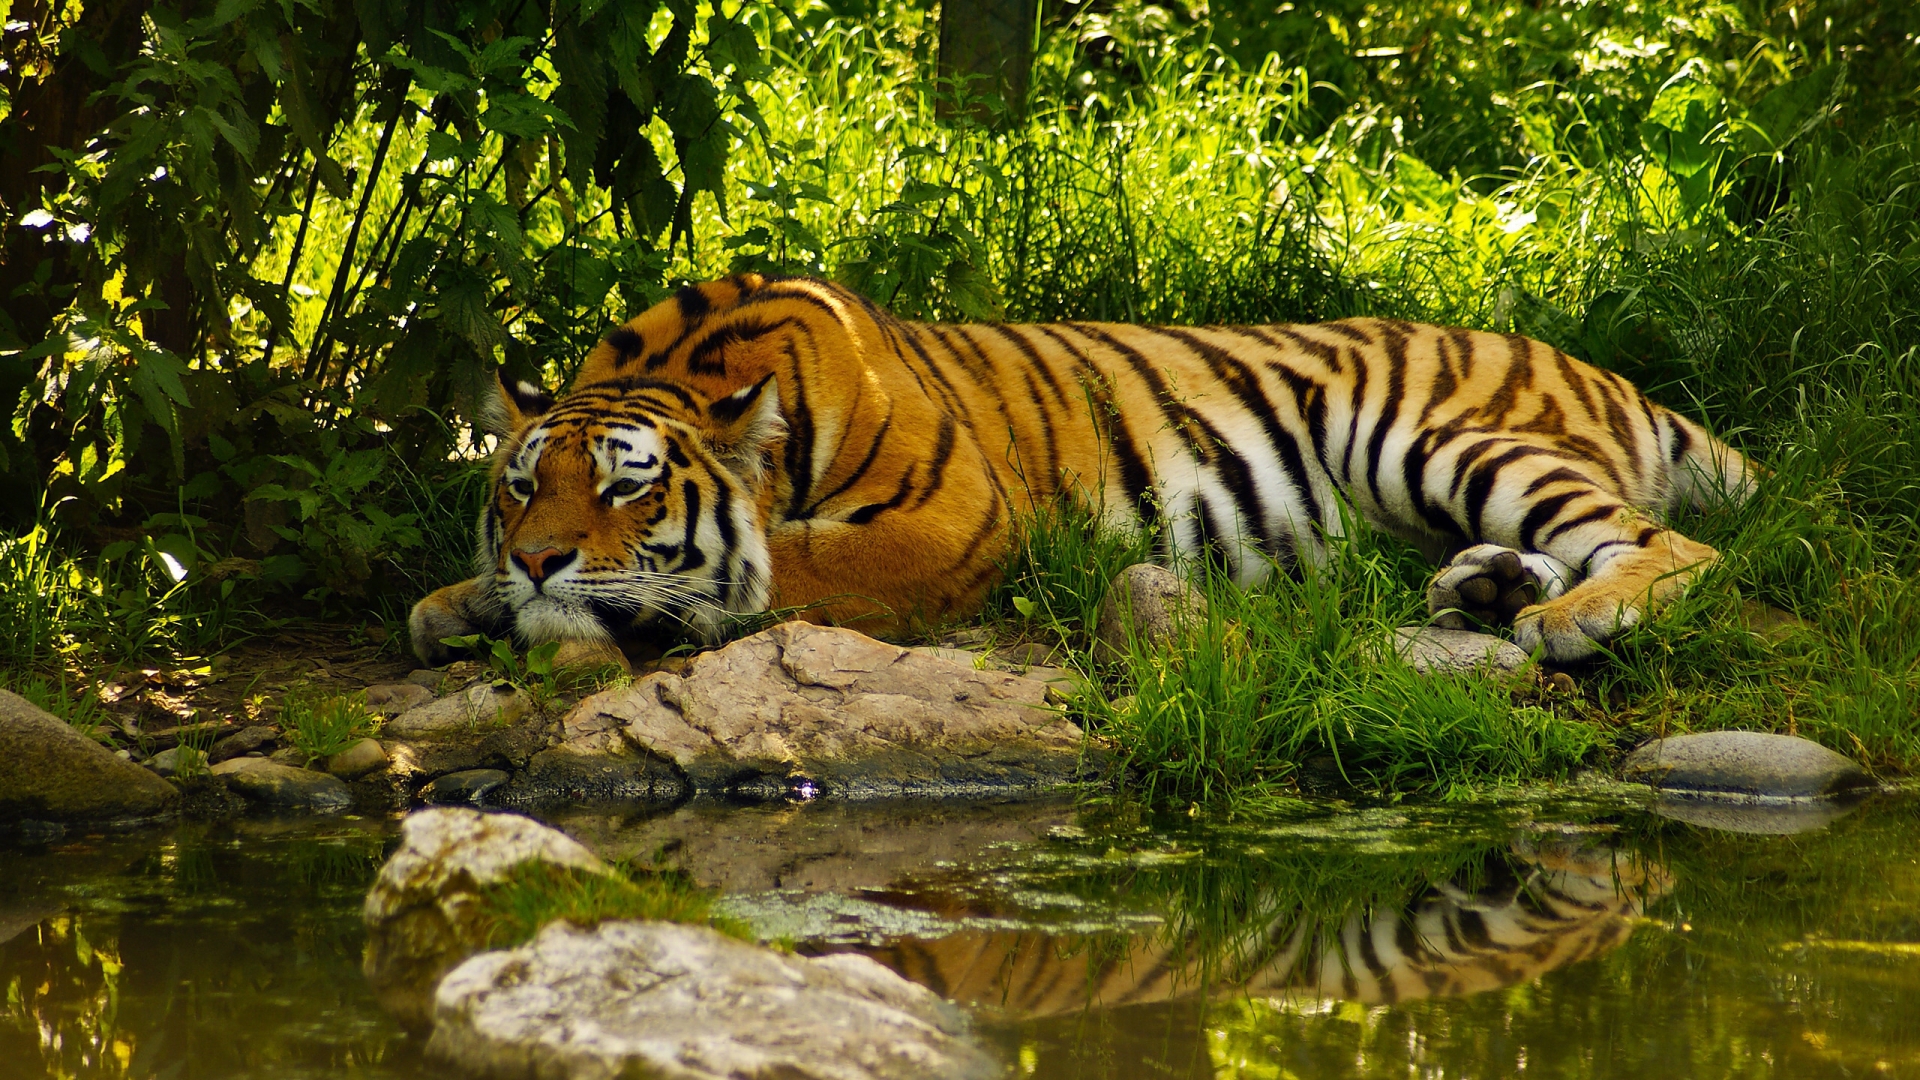 Amazing Tiger for 1920 x 1080 HDTV 1080p resolution